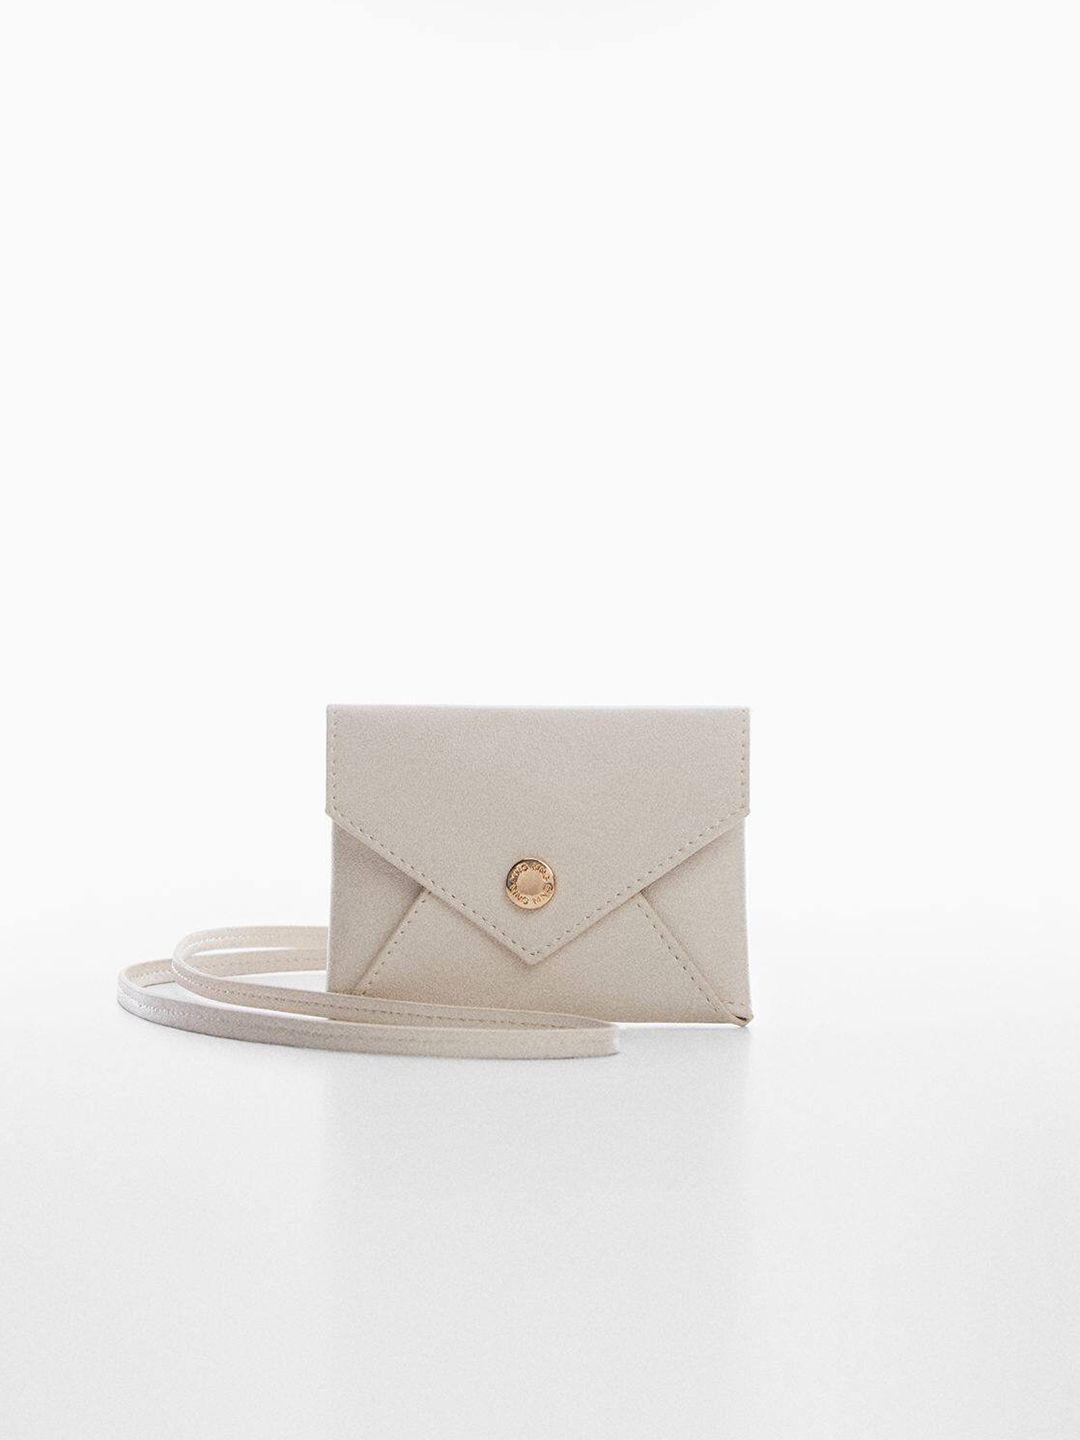 mango-coin-envelope-purse-with-wrist-loop